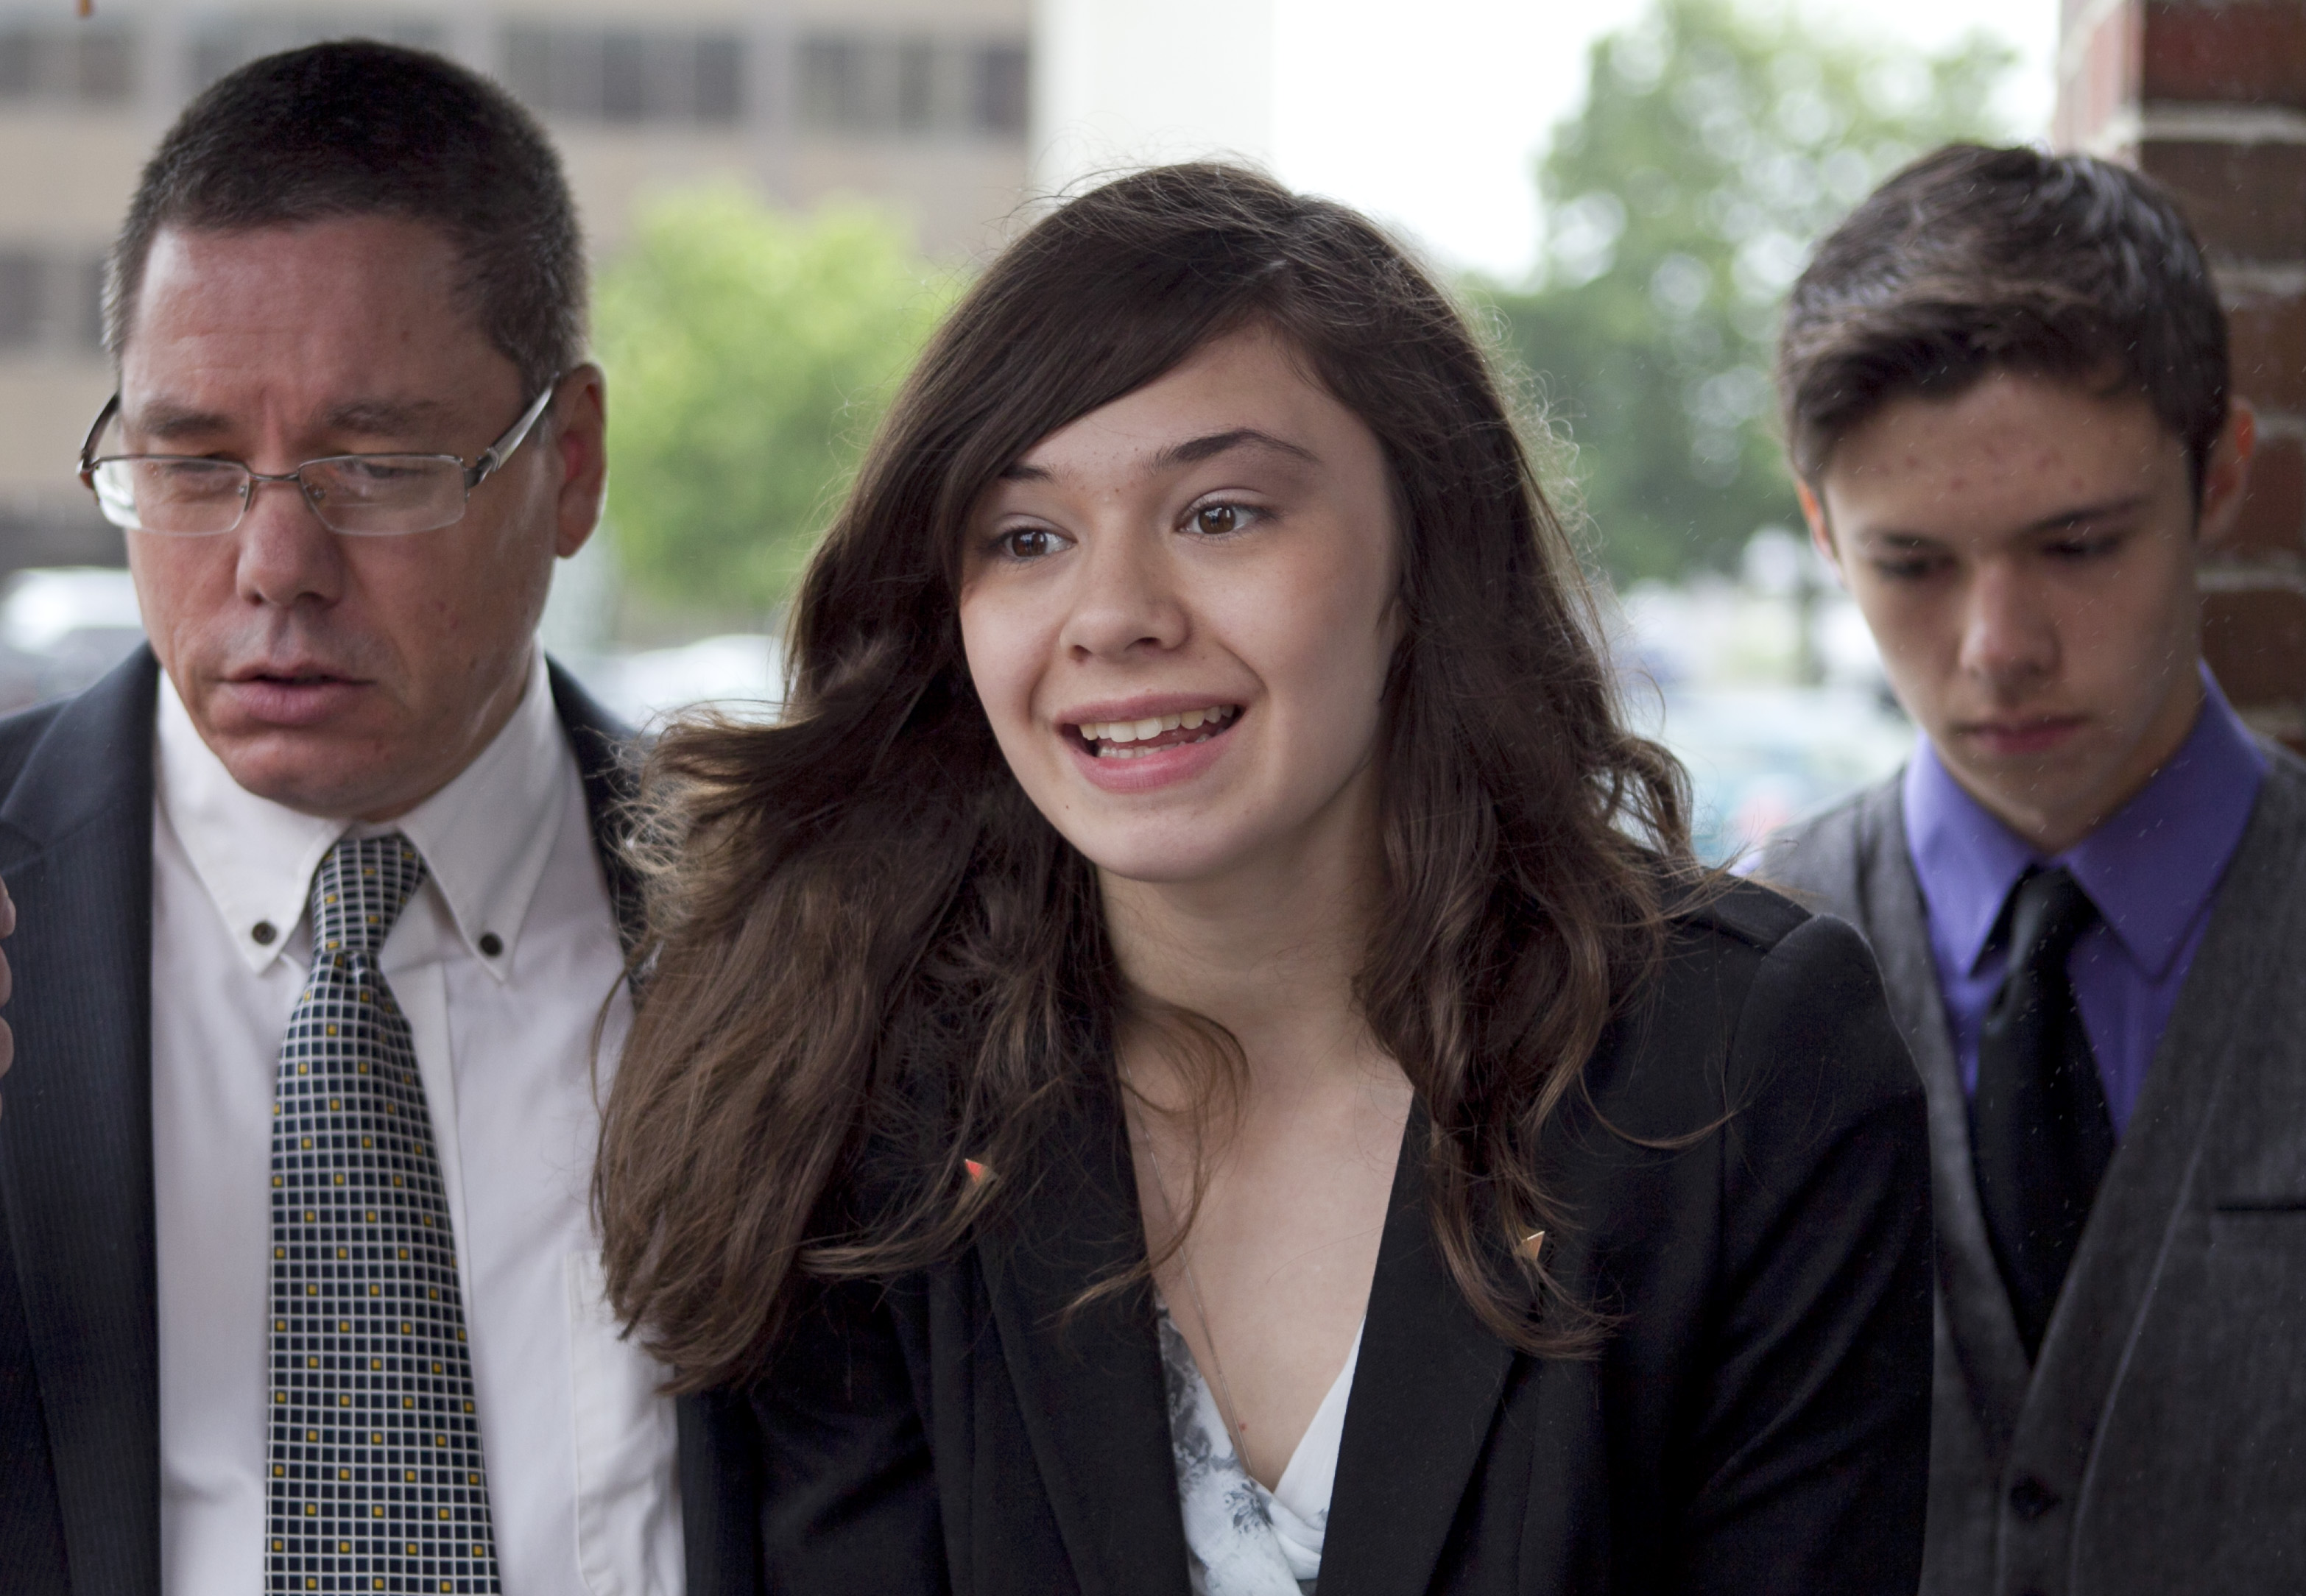 Transgender student Nicole Maines, center, speaks to reporters as her father Wayne Maines, left, and brother Jonas, look on outside the Penobscot Judicial Center in Bangor, Maine, on June 12, 2013.